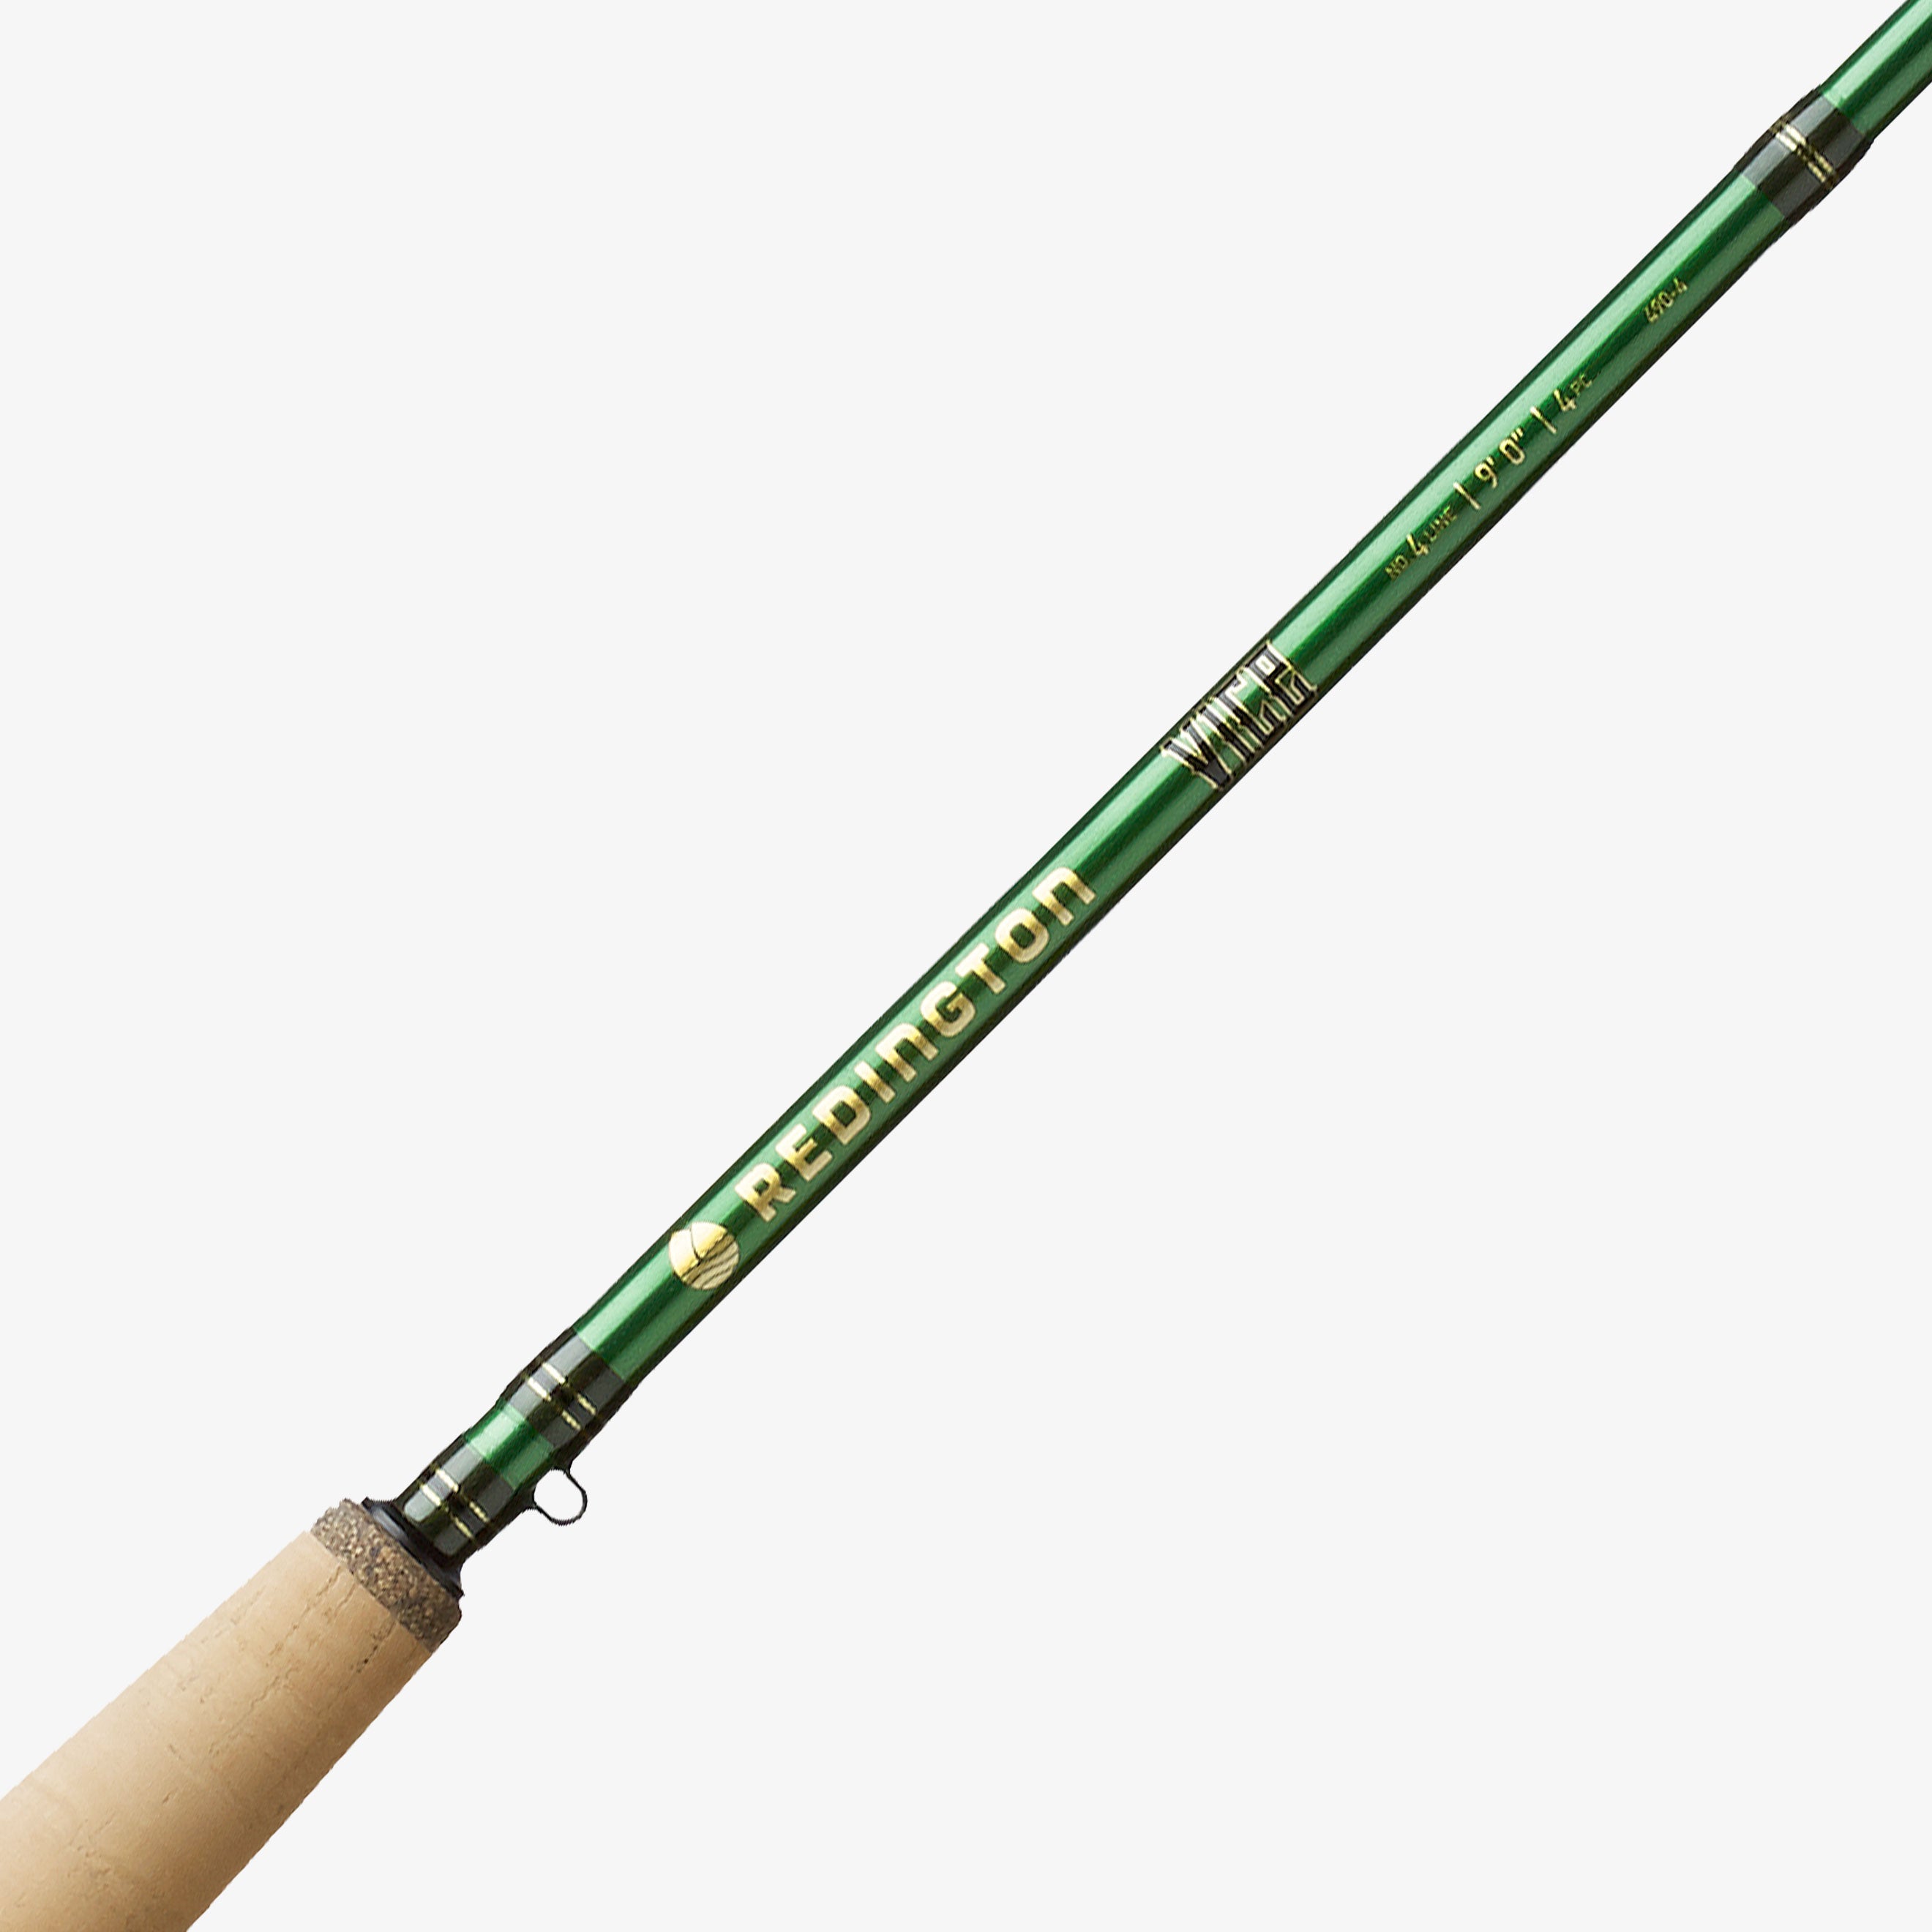 VICE Fly Fishing Rod 5 Weight, 9ft 6in | Redington